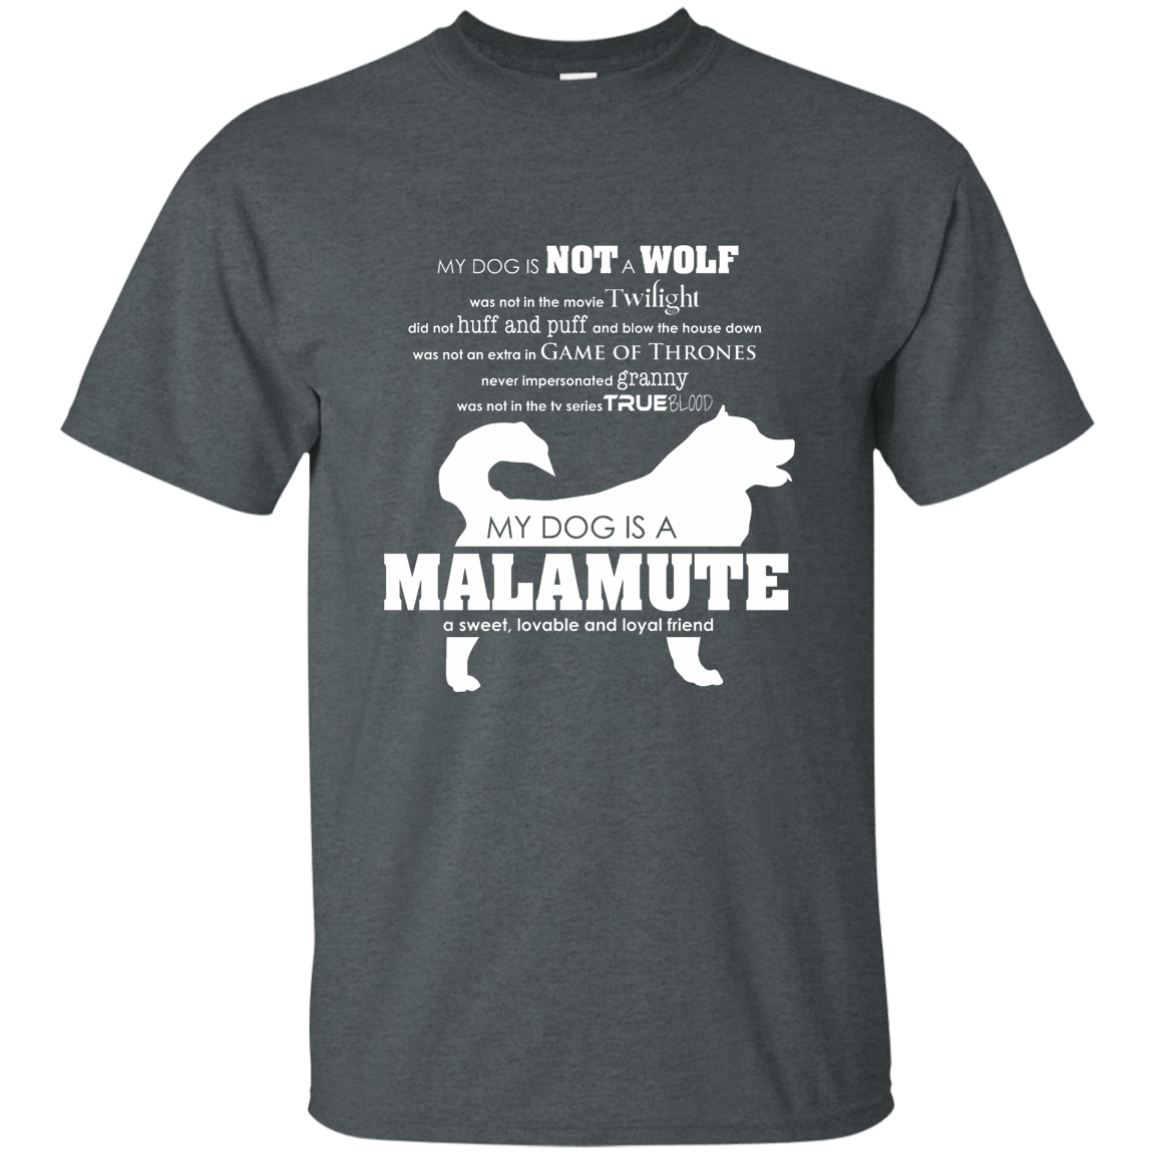 My Dog is Not a Wolf, My Dog is a Malamute - T-Shirt